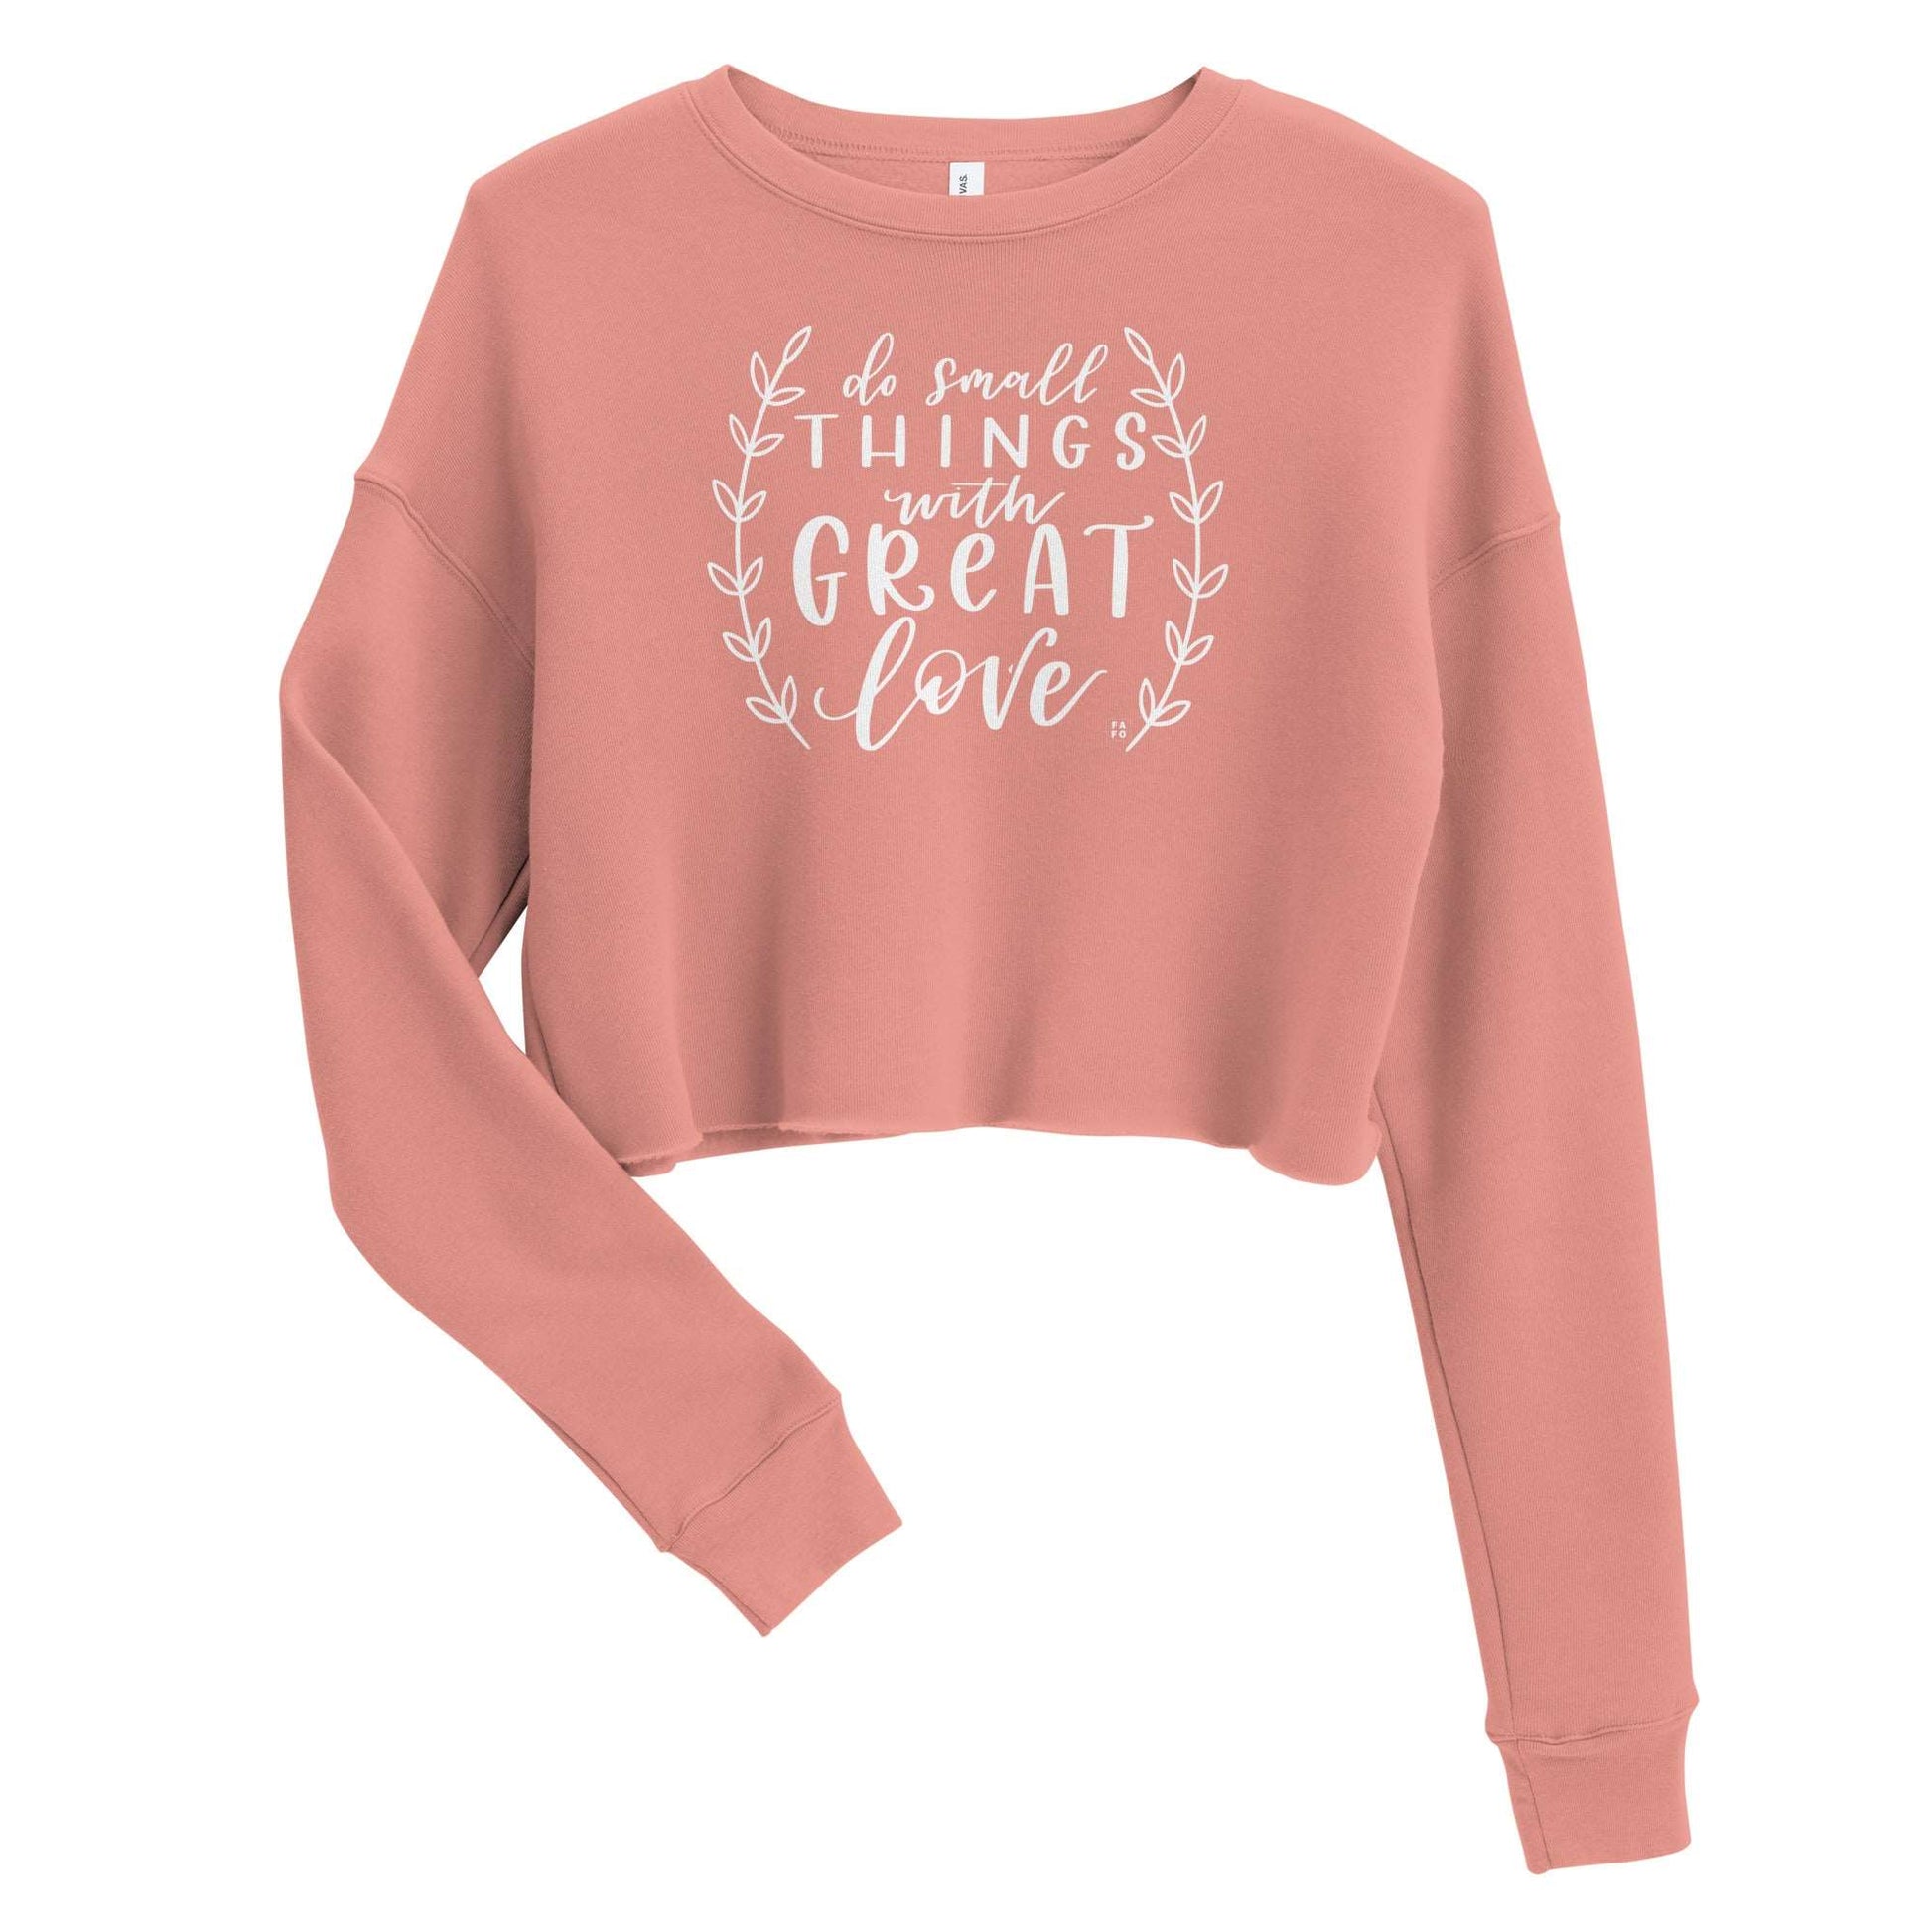 Women's Crop Sweater - Do Small Things - Blush Pink